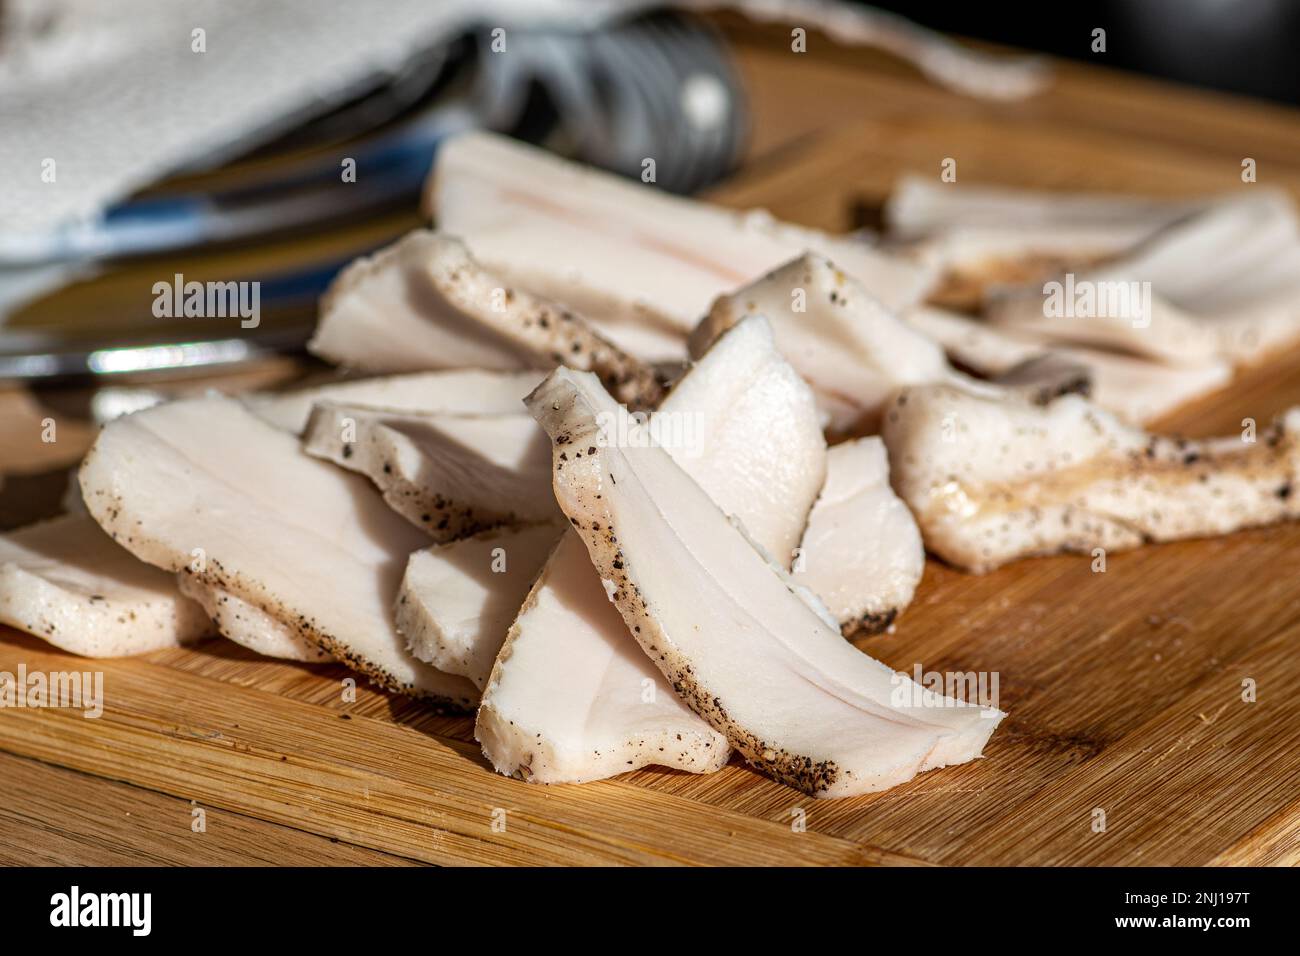 Pieces of lard or bacon, sliced thinly for consumption, on a wooden cutting board in a street food market, close up Stock Photo